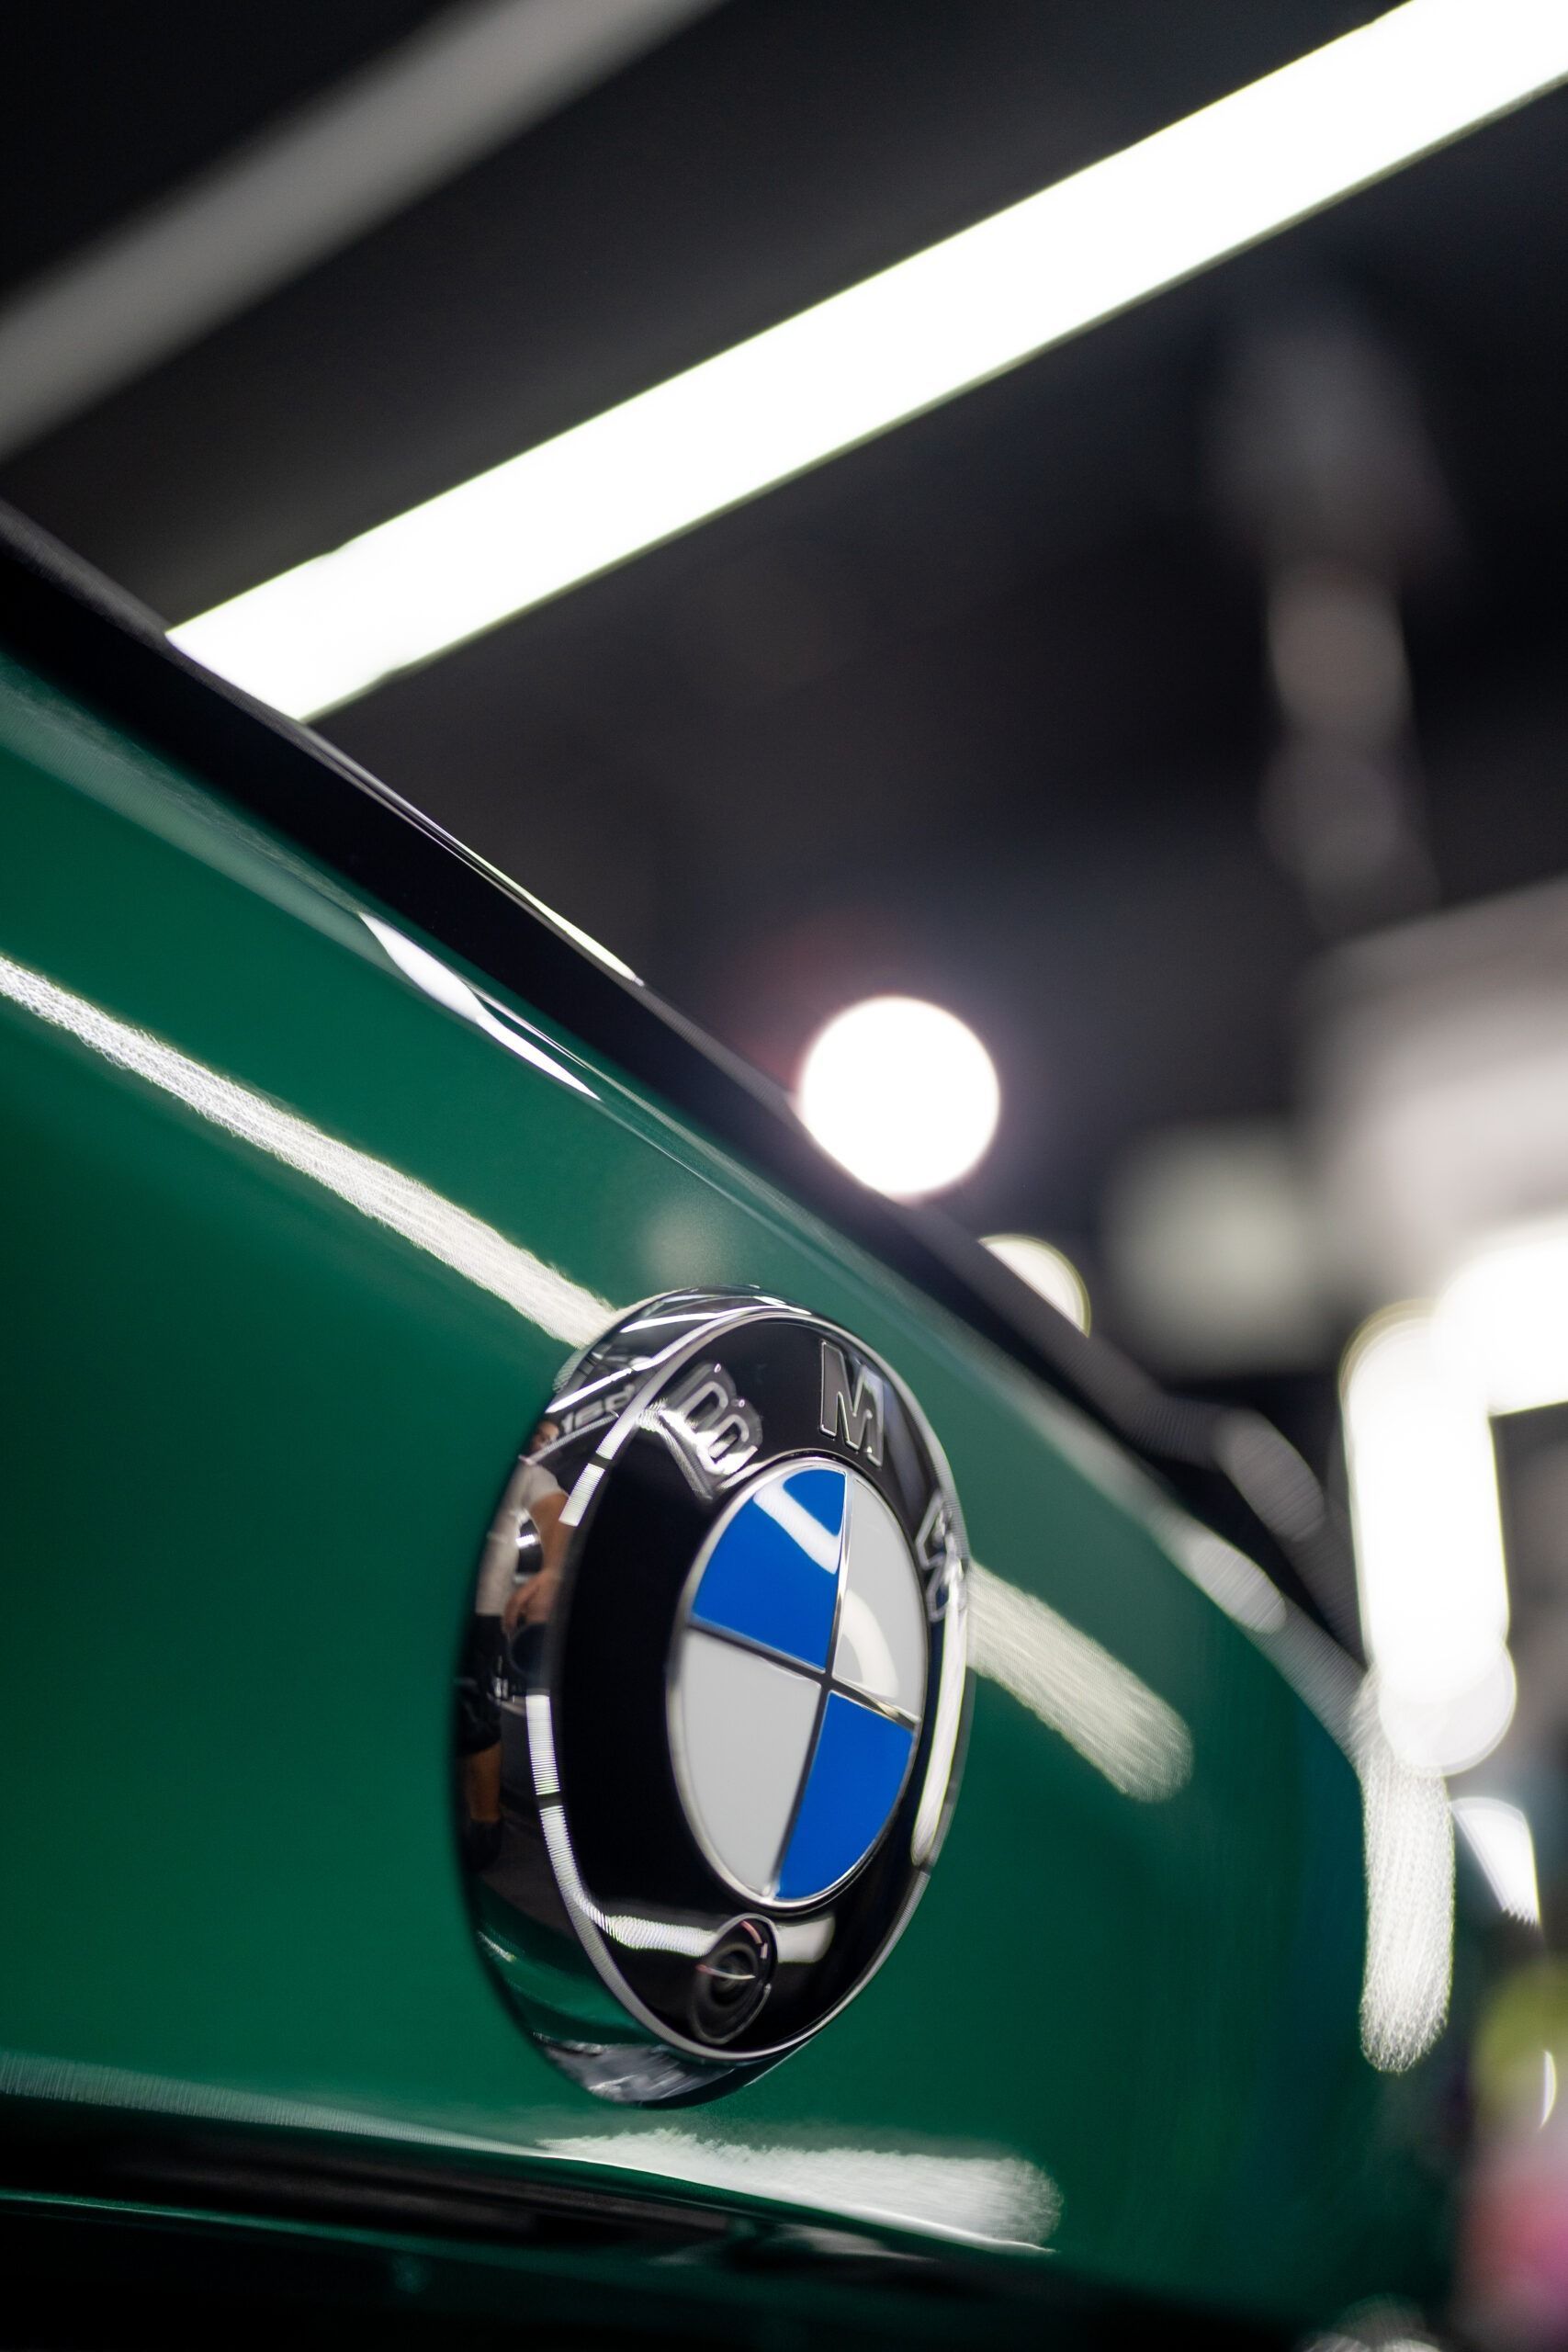 A close up of a bmw logo on a green car